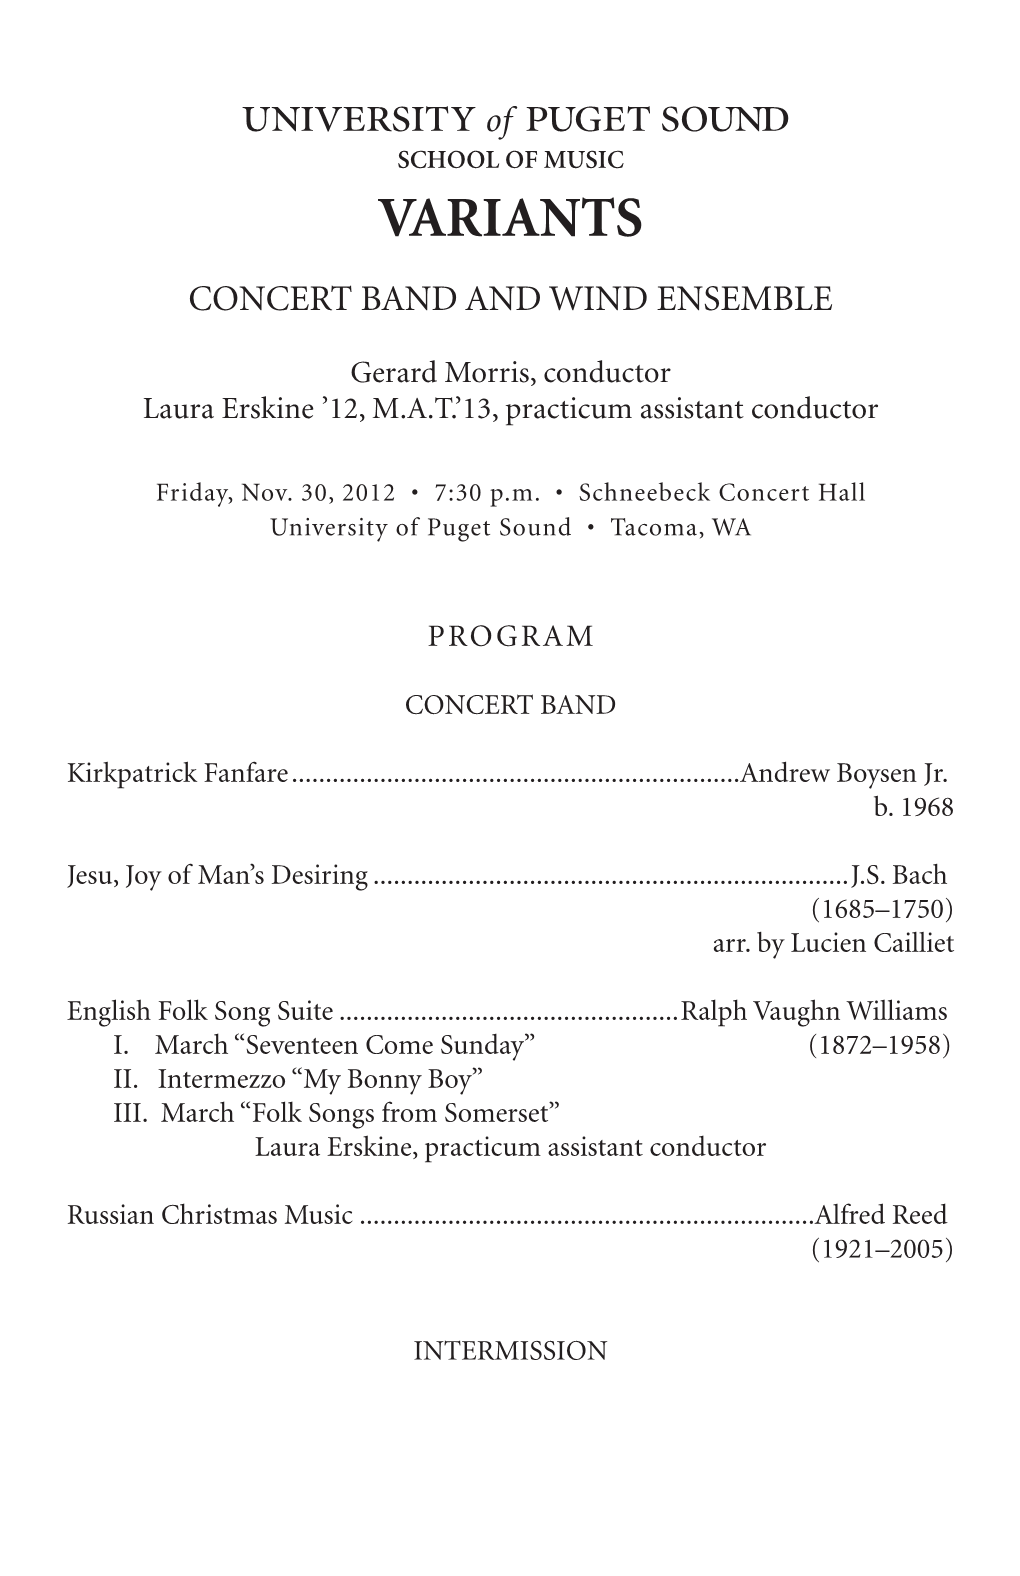 Variants Concert Band and Wind Ensemble